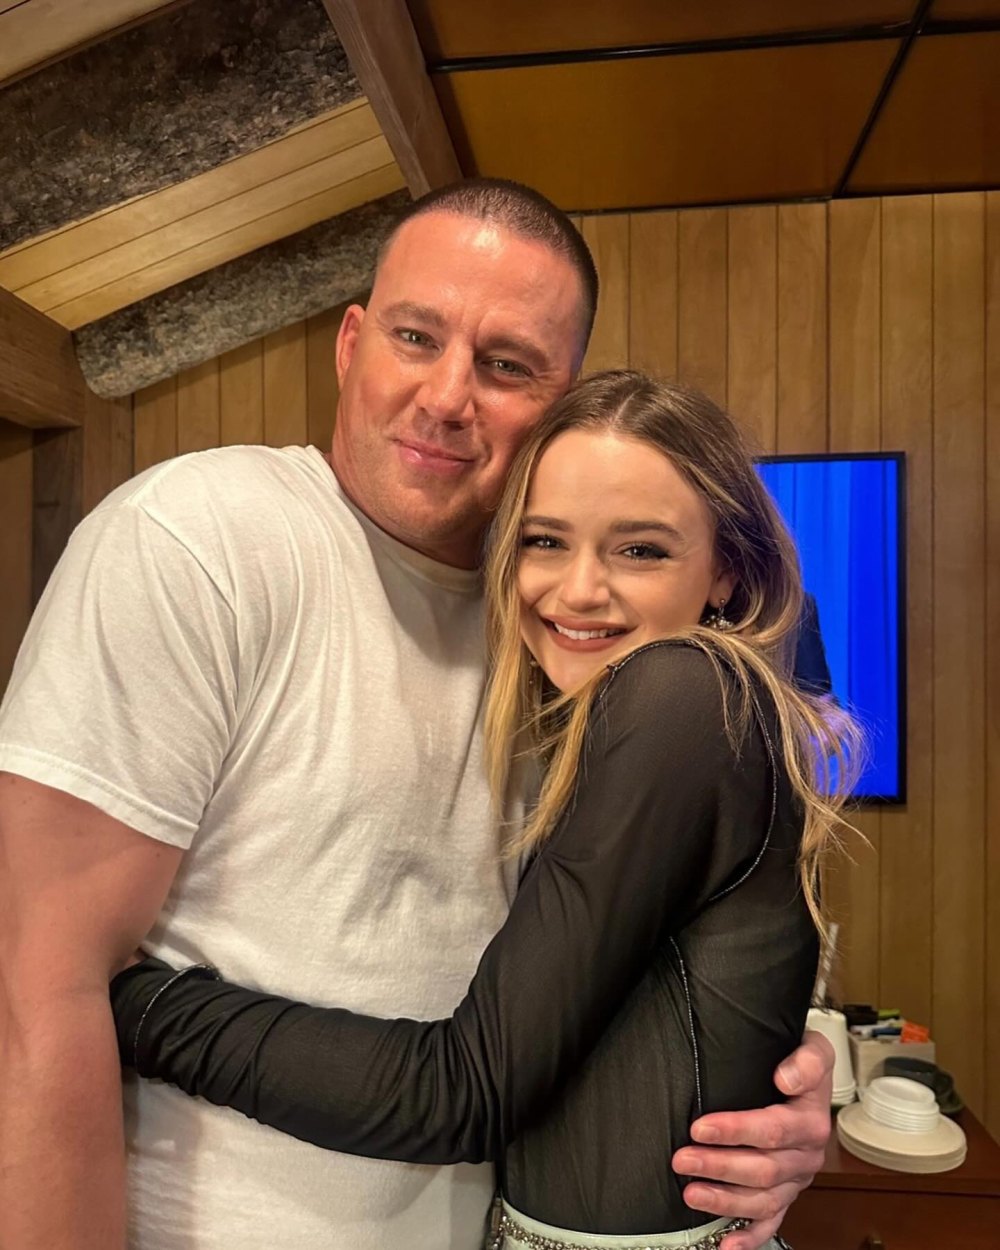 Joey King Bumps Into Channing Tatum 11 Years After White House Down